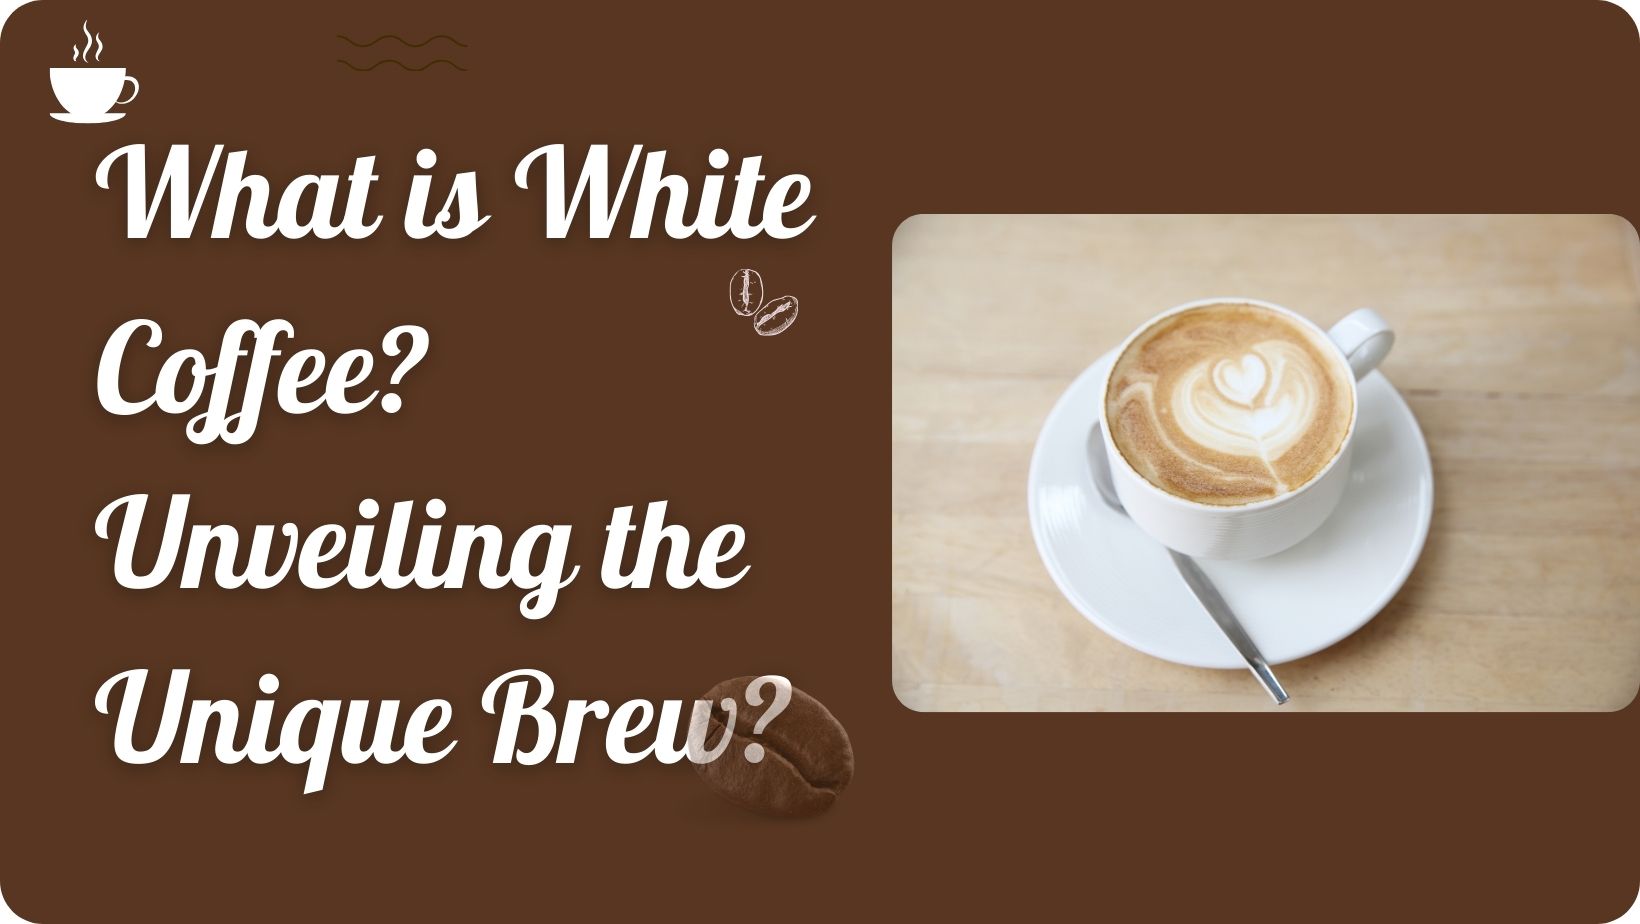 What is White Coffee? Unveiling the Unique Brew?